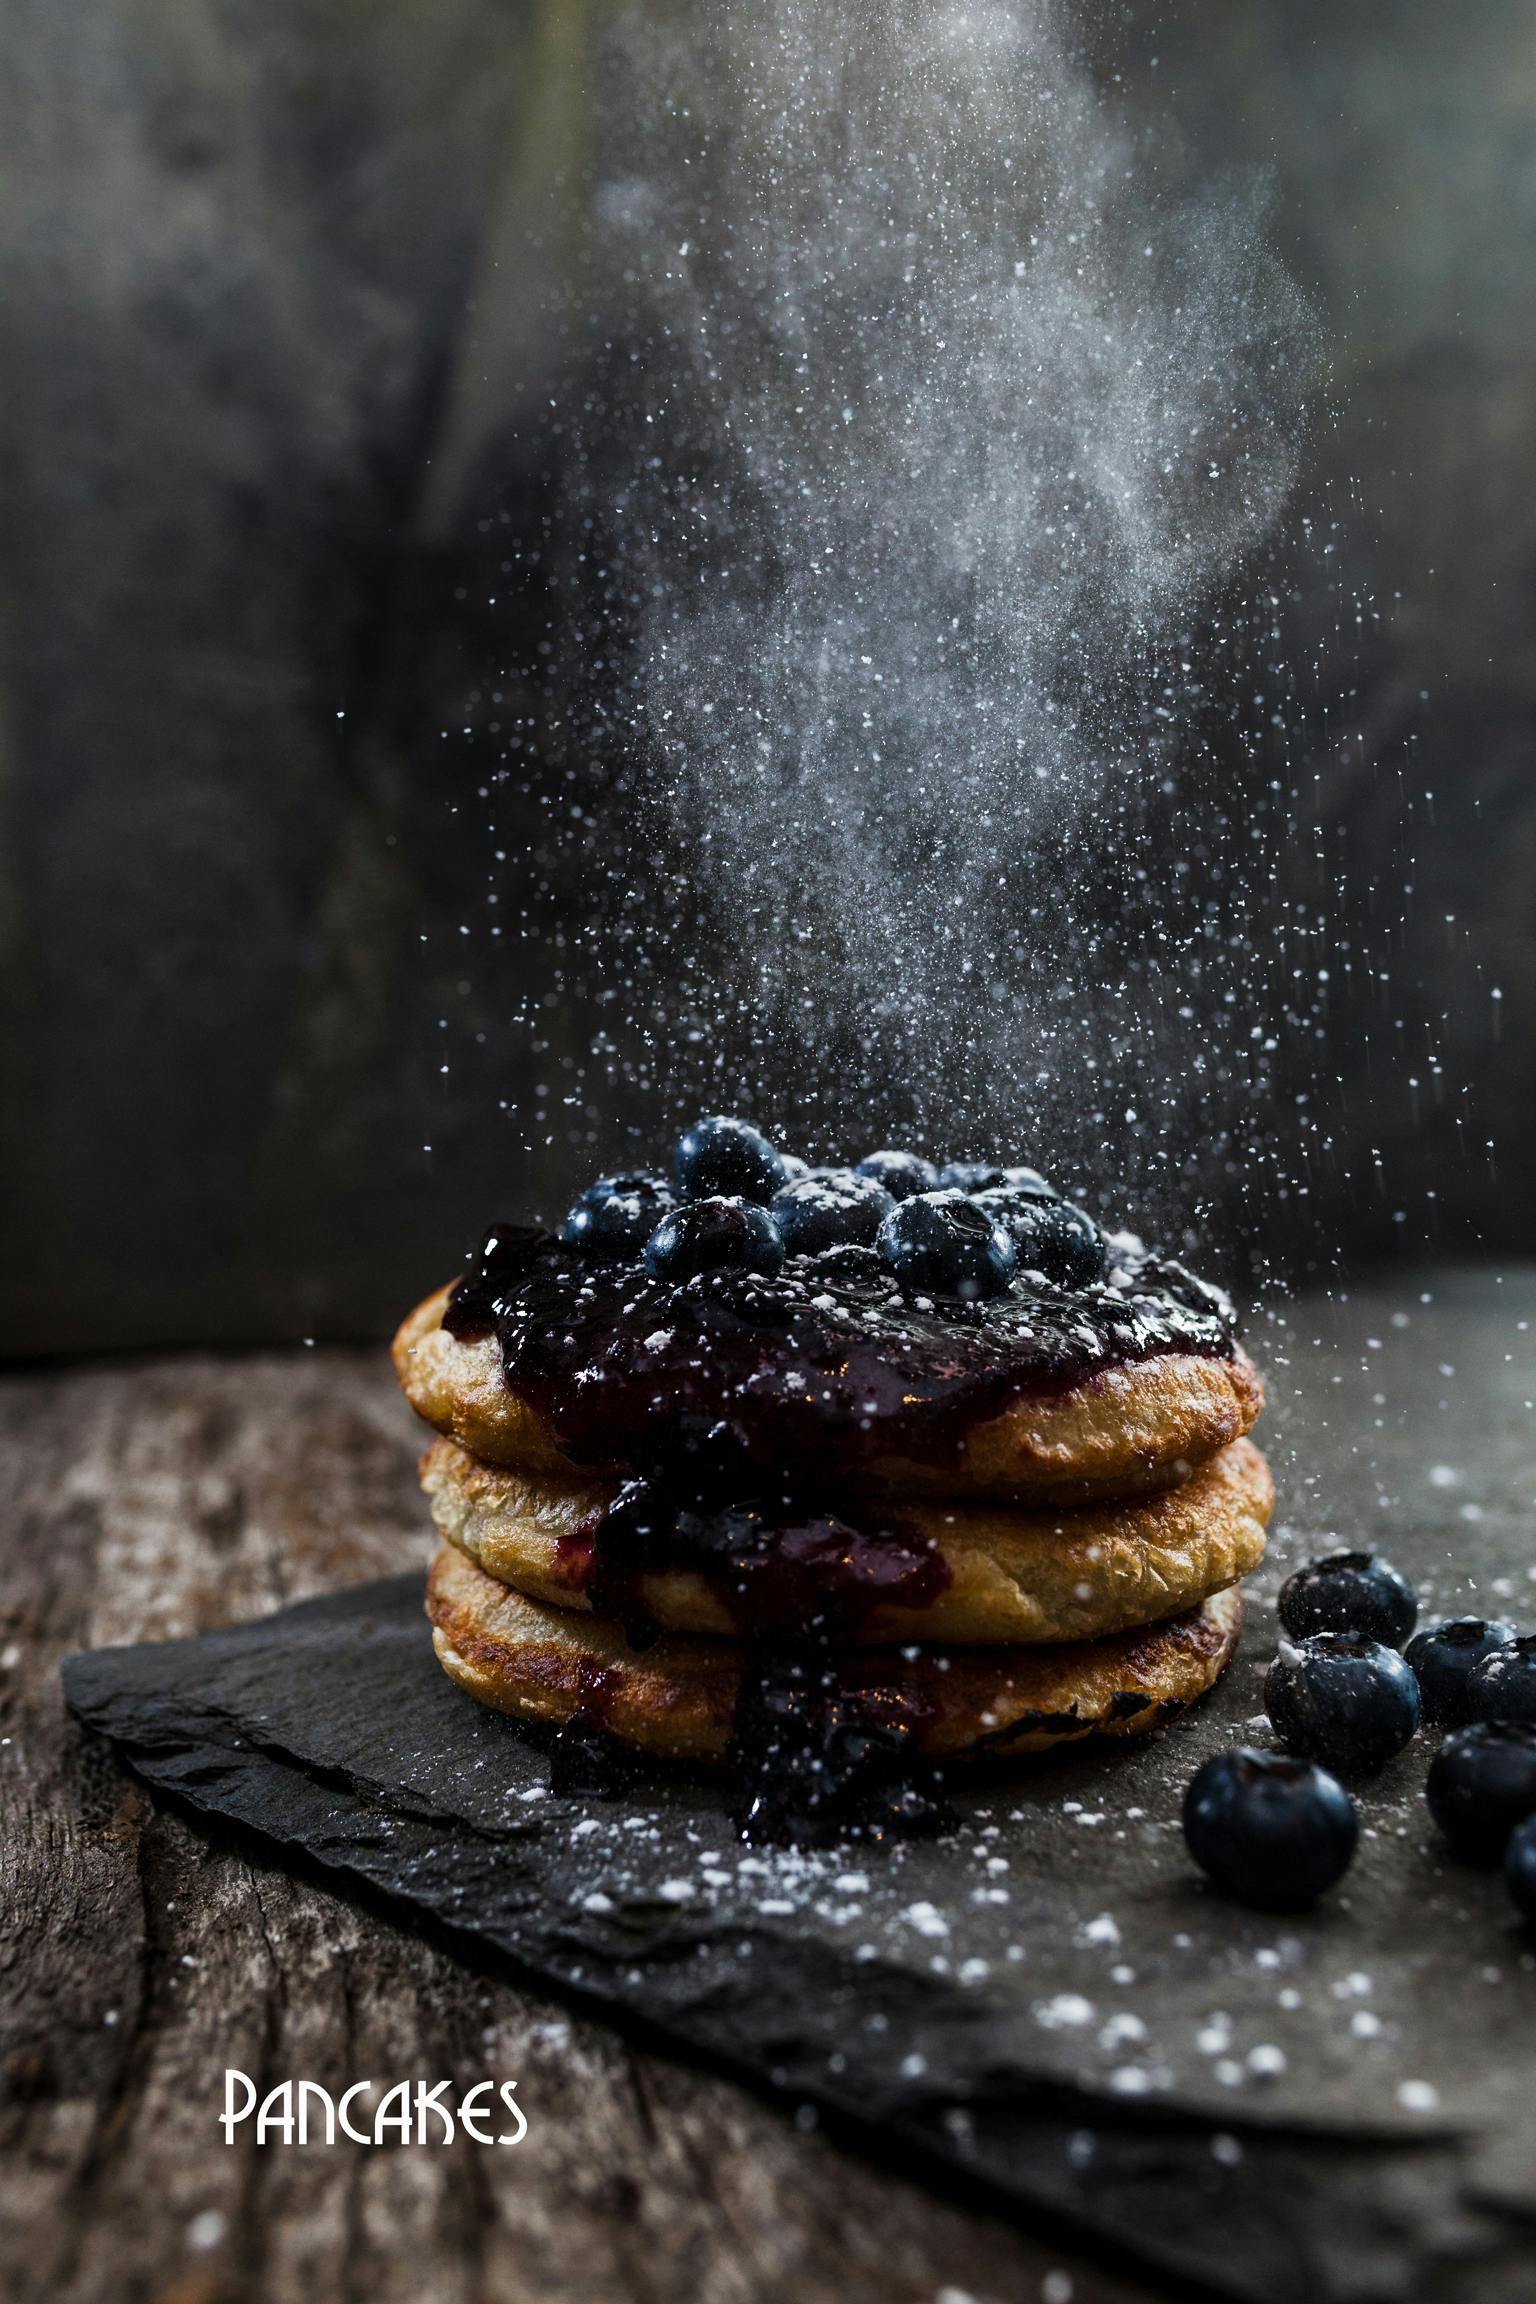 Handmade pancakes with blueberry sauce and fresh blueberries, coated by icing sugar